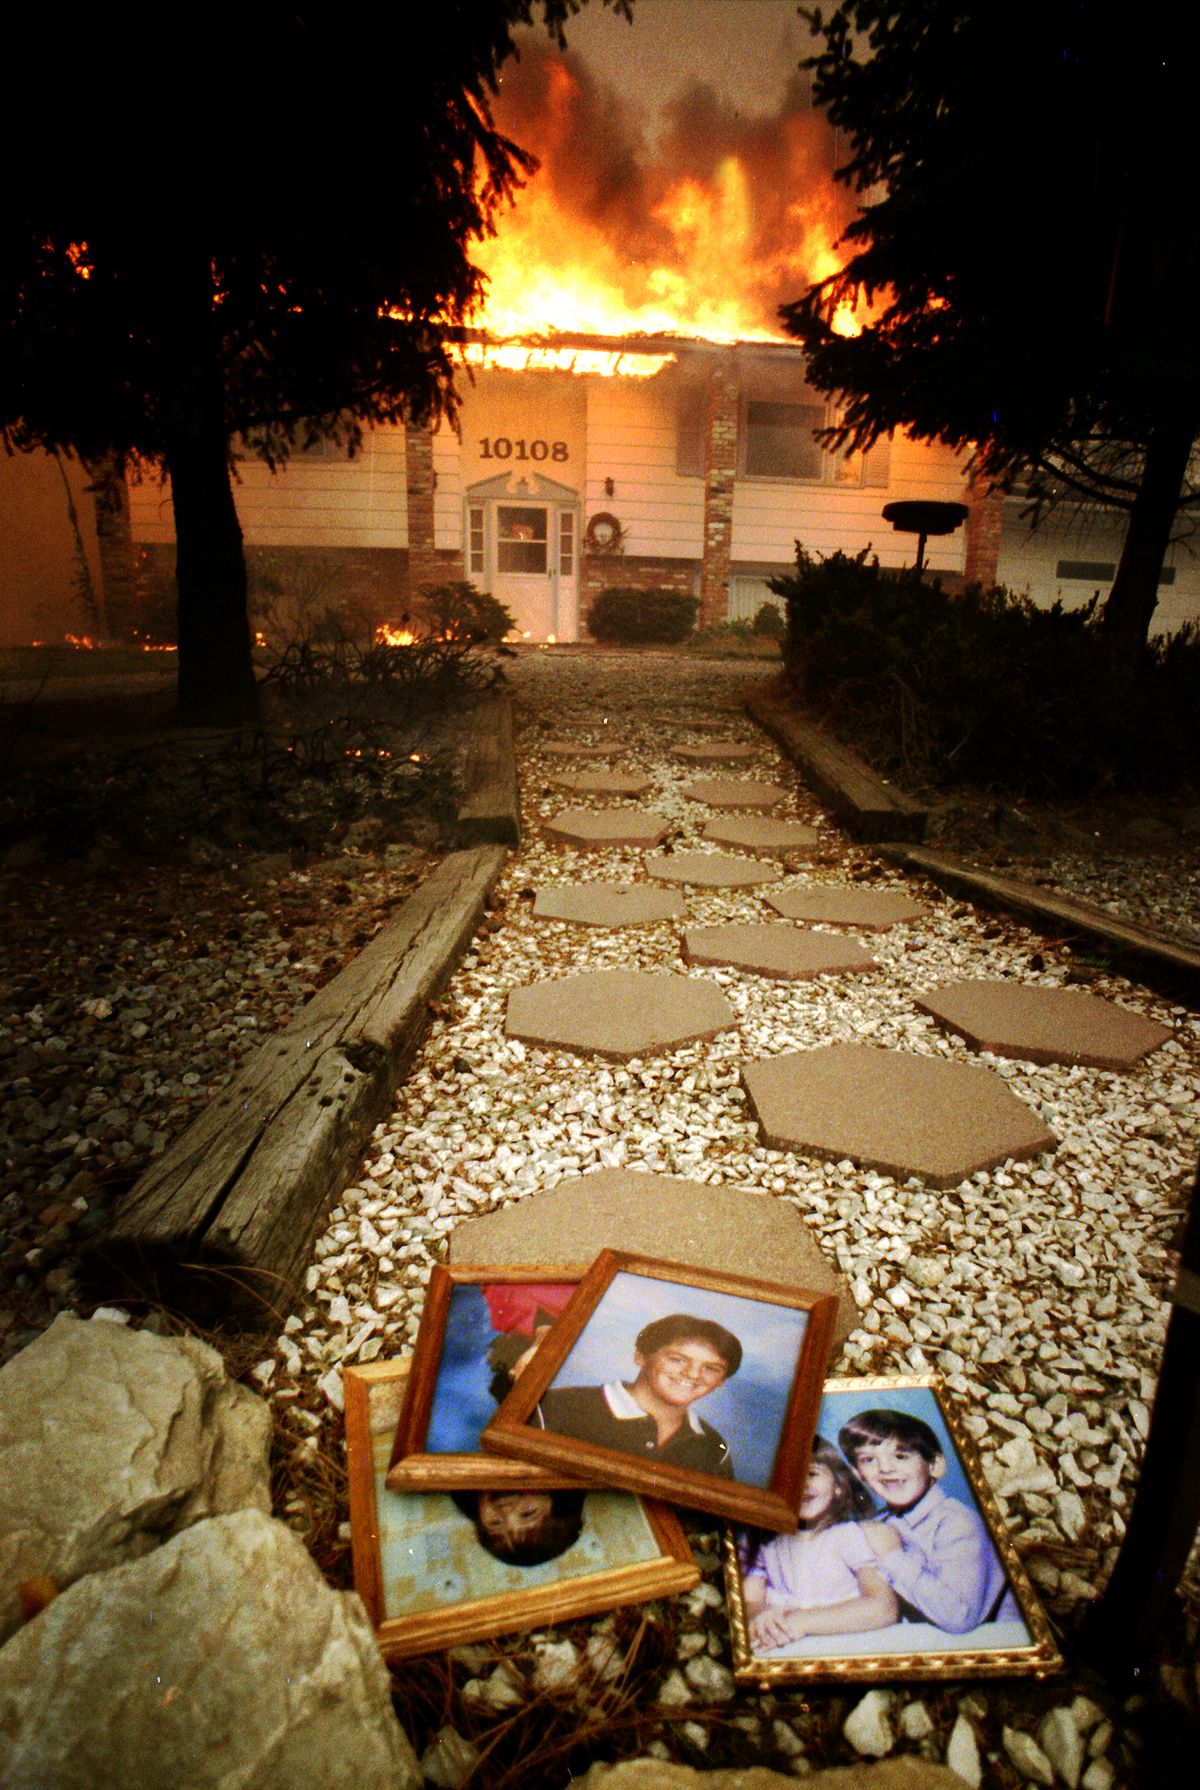 A firefighter salvaged family photos from a Ponderosa home  and laid them at the end of the walkway. (Colin Mulvany / The Spokesman-Review)